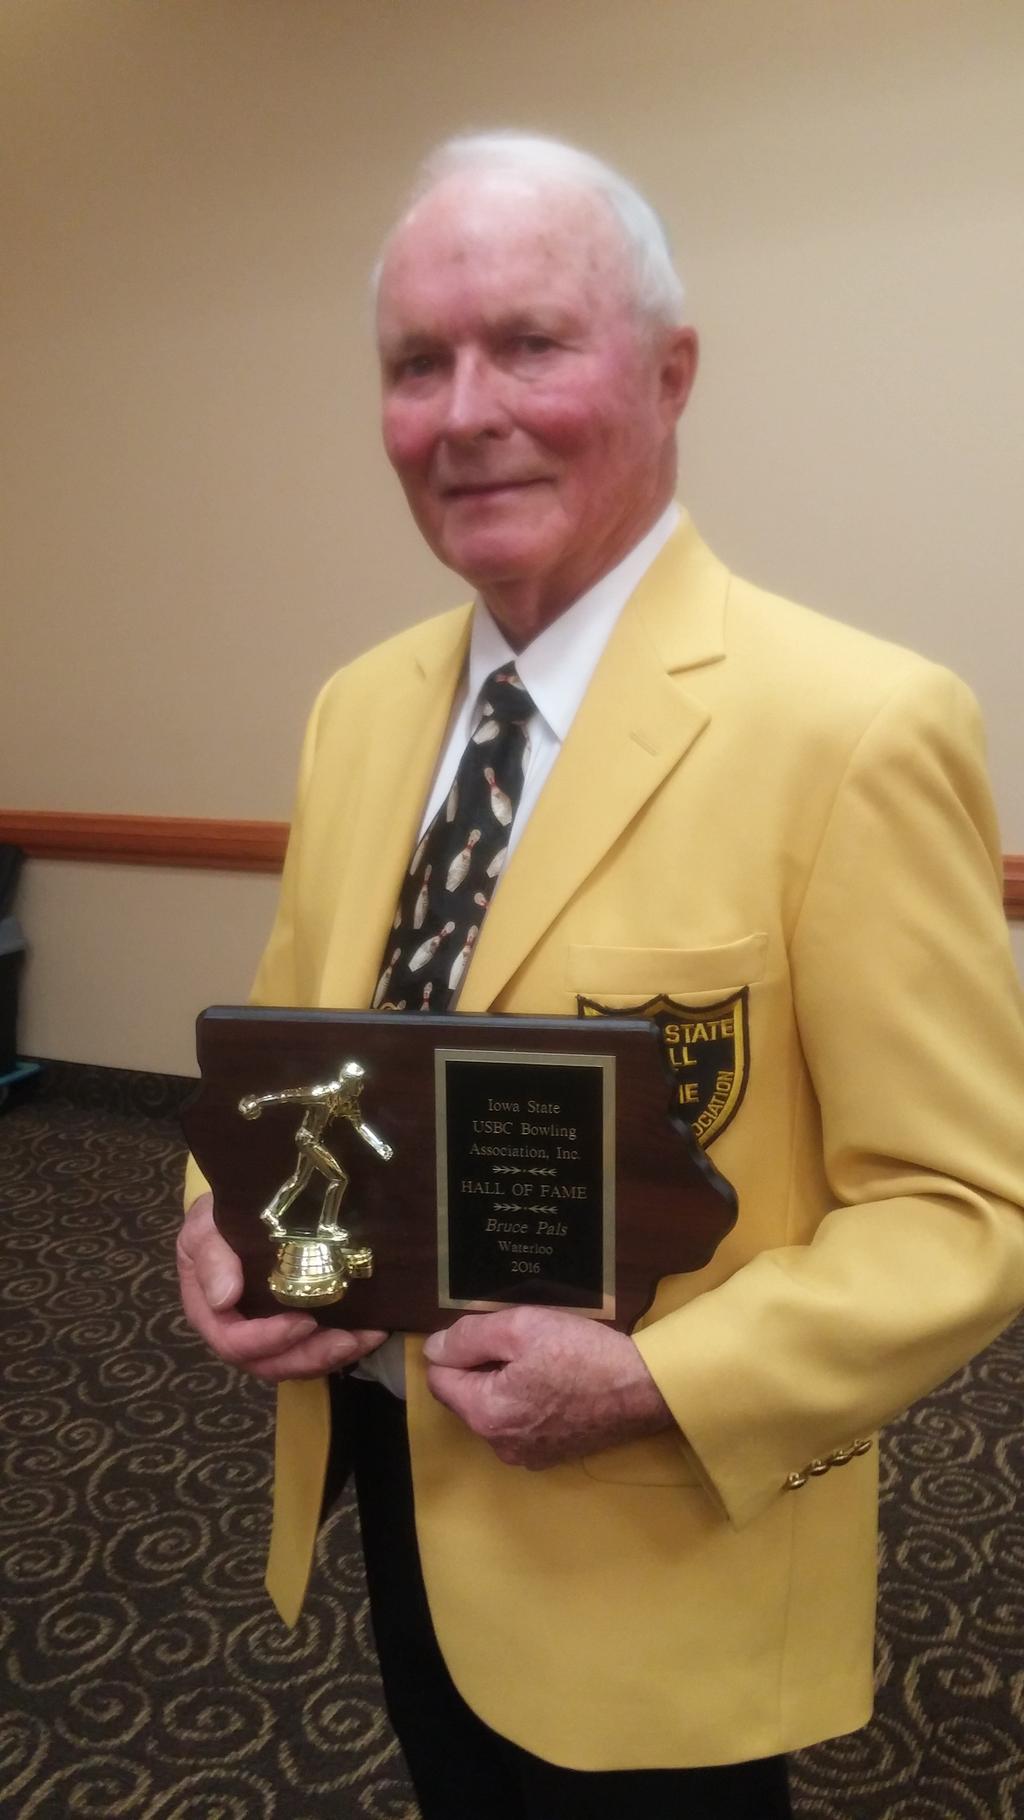 Sincerely: The Greater Cedar Valley USBC Bowling Association Joseph Engelkes, Chairman, Hall of Fame